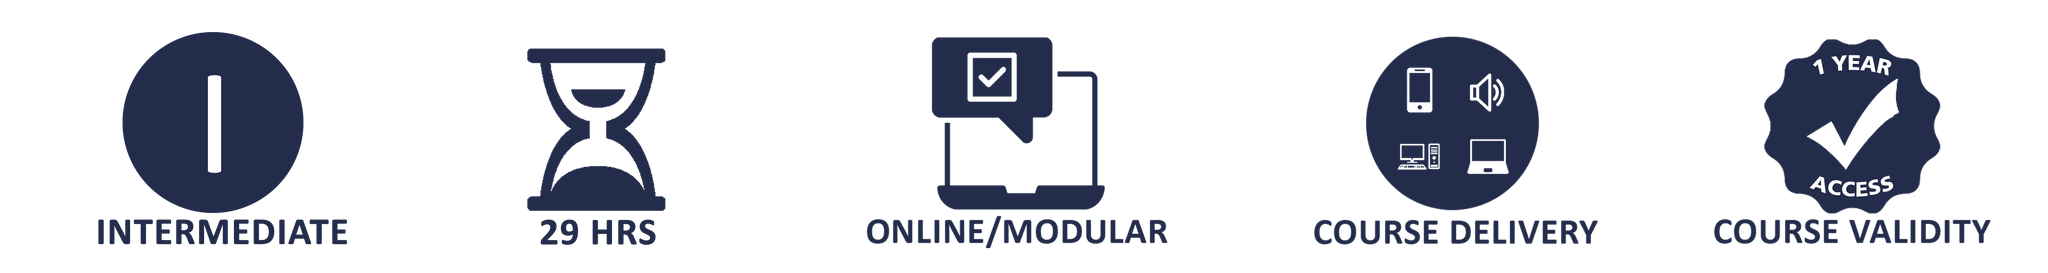 Mandatory Training for Support Workers - Online Training Package - The Mandatory Training Group UK -